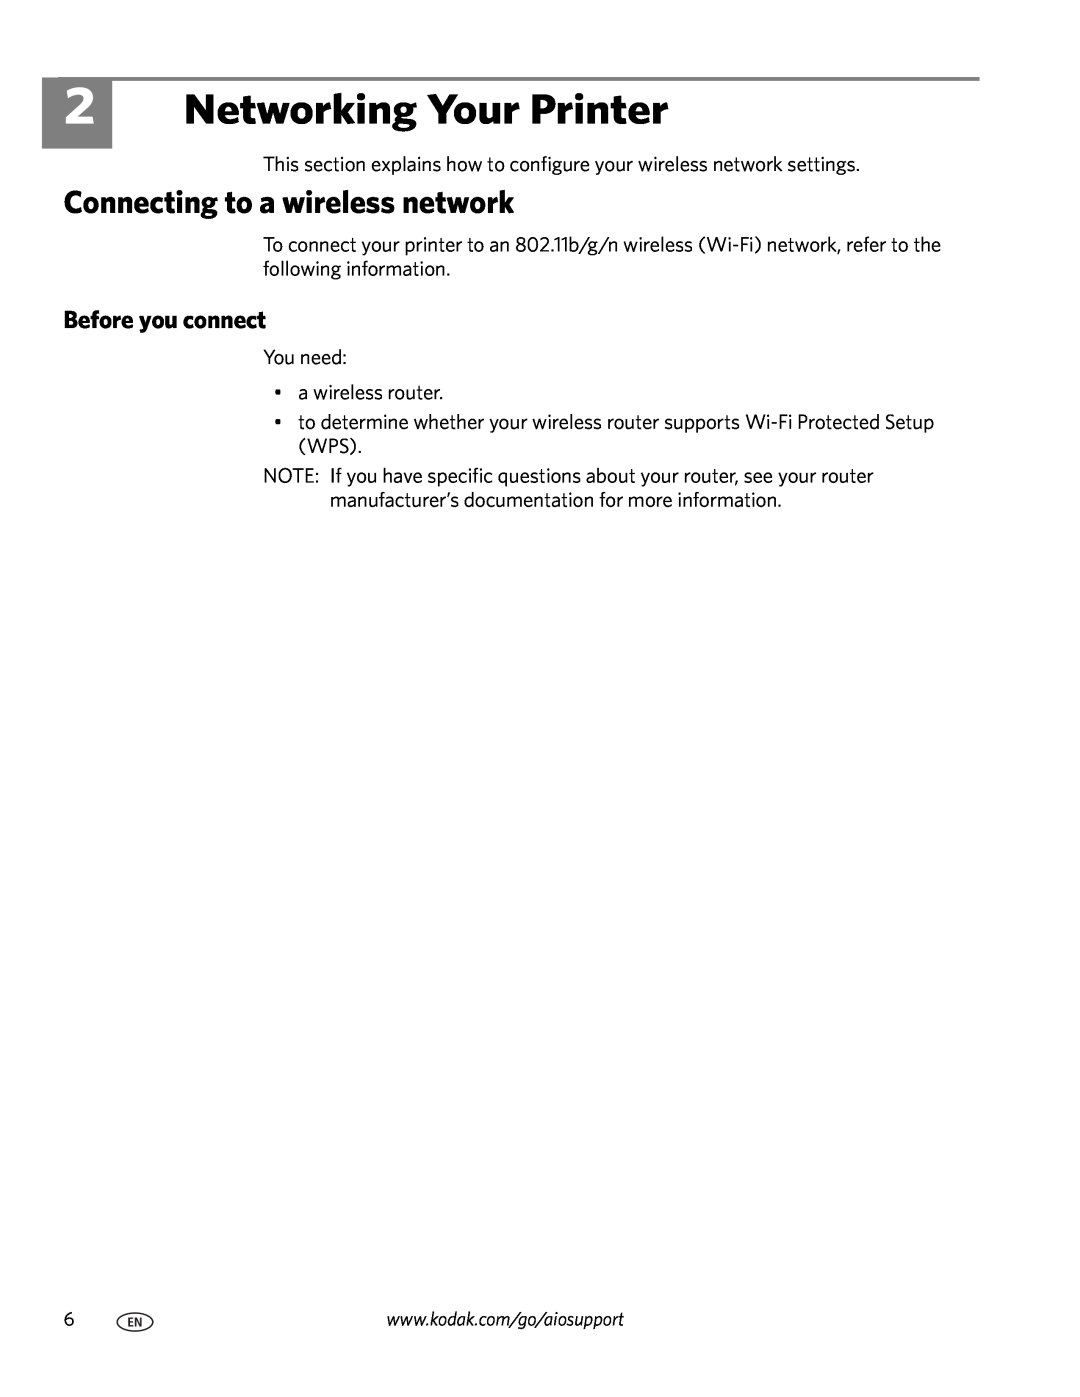 Kodak 3.1 manual Networking Your Printer, Connecting to a wireless network, Before you connect 